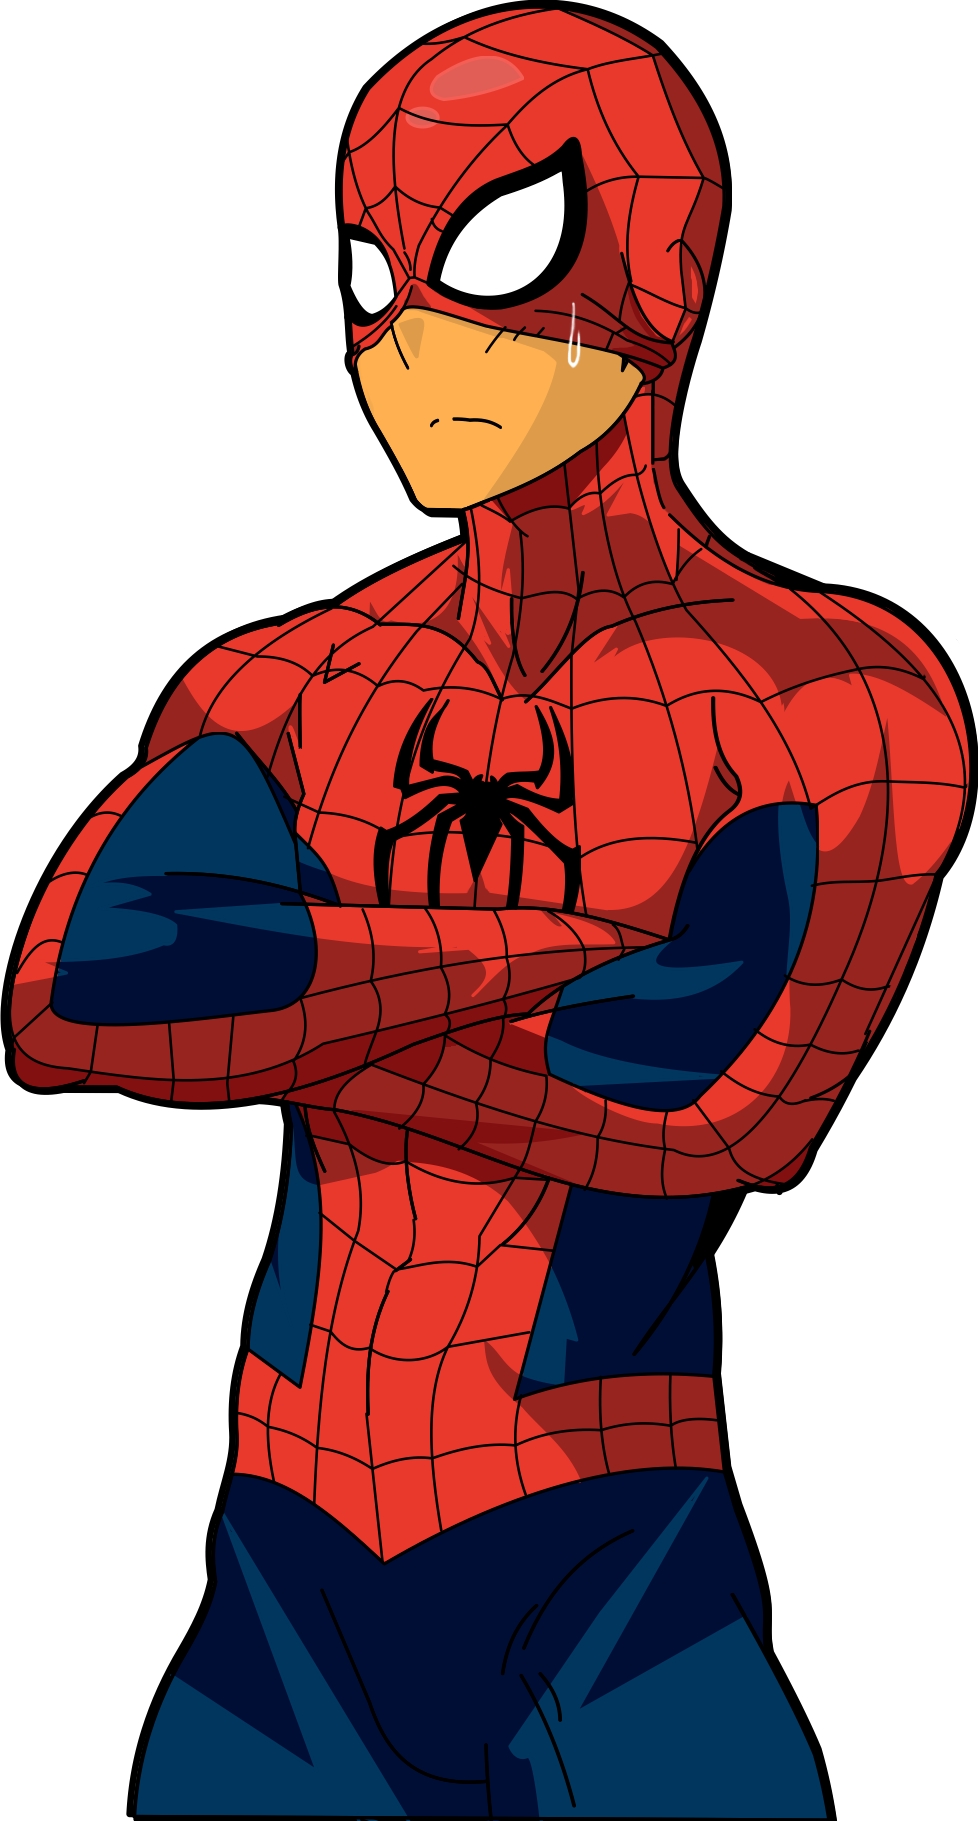 19.Avatar Kyon Spiderman by xsyphax